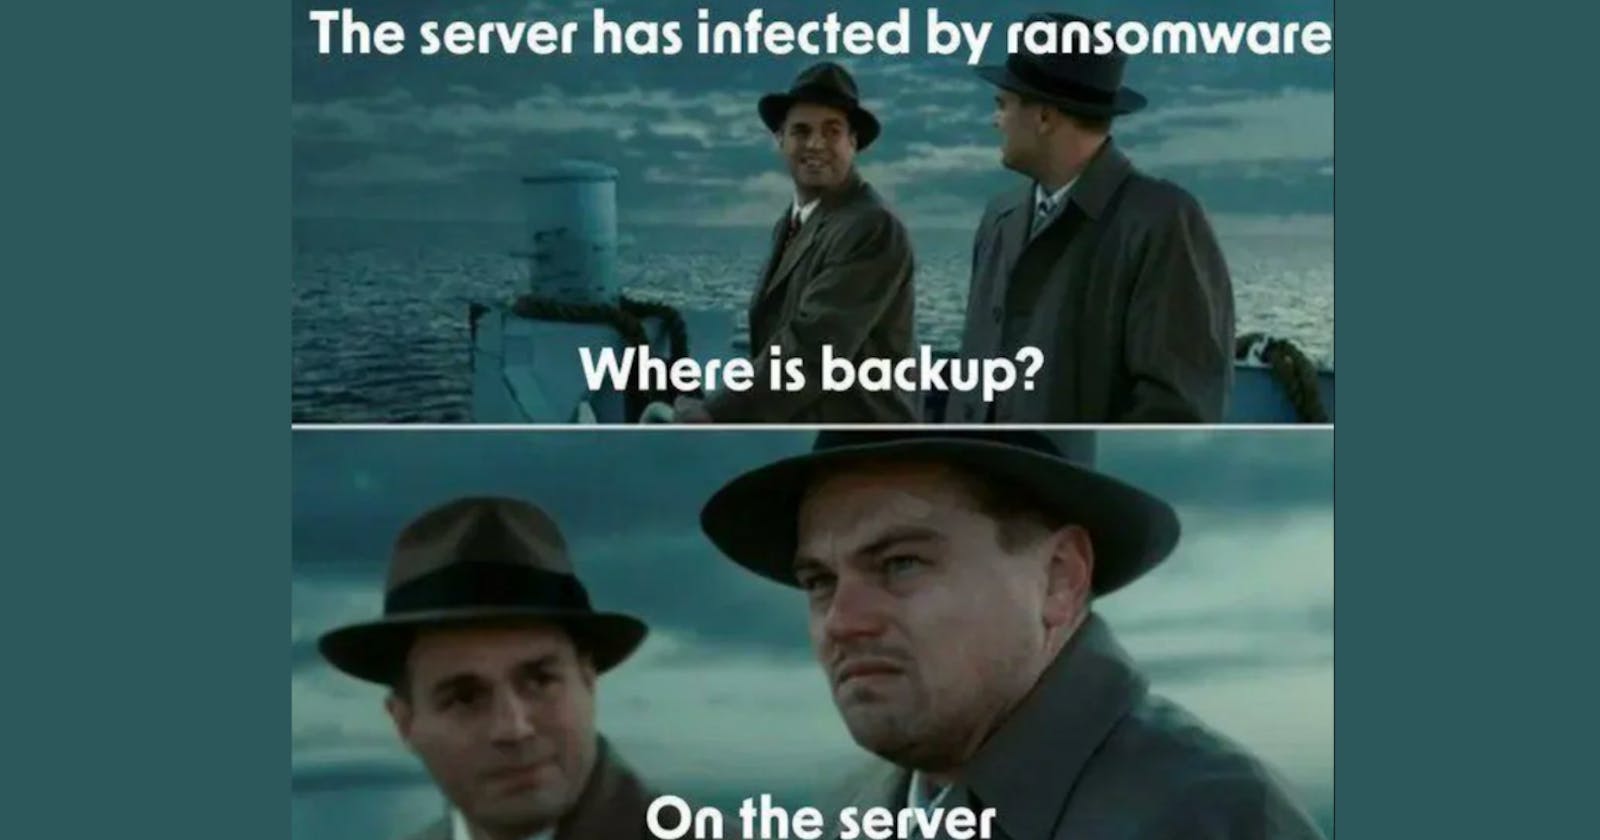 Ransomware — what could possibly go wrong & where is the backup?